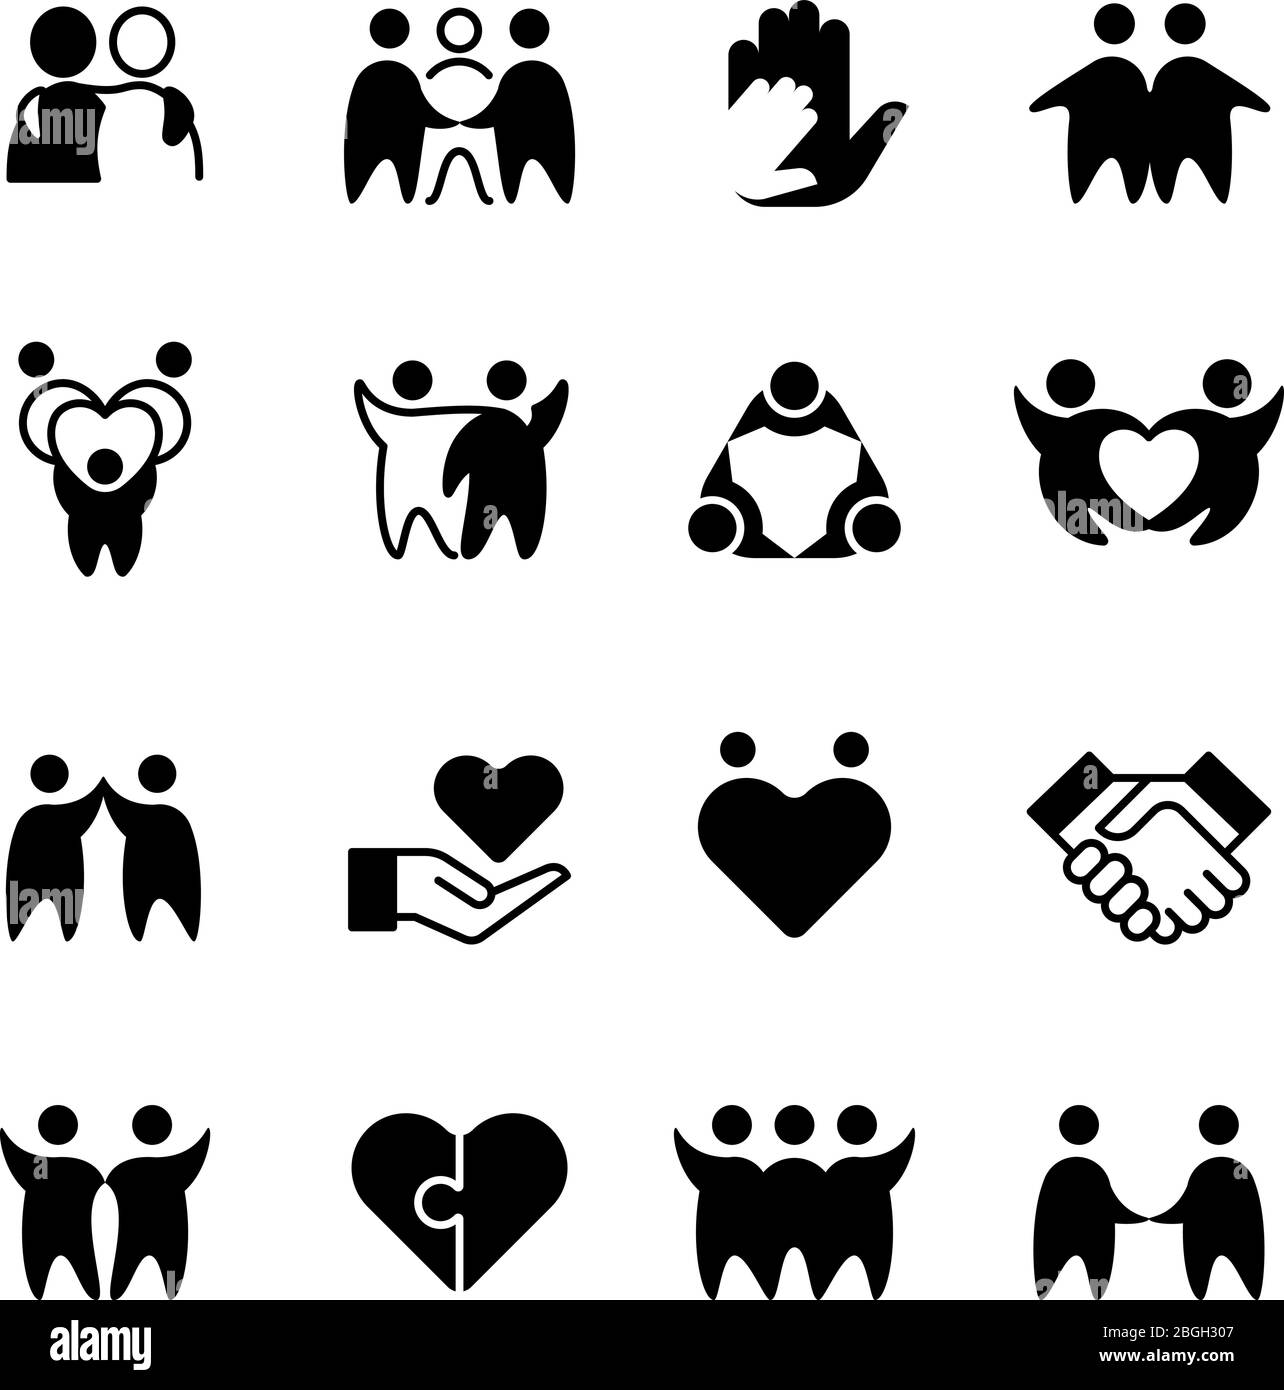 Friends, buddies, man hug line icons. Friendship, harmony and friendly group outline symbols isolated. Vector people male friends together monochrome black illustration Stock Vector